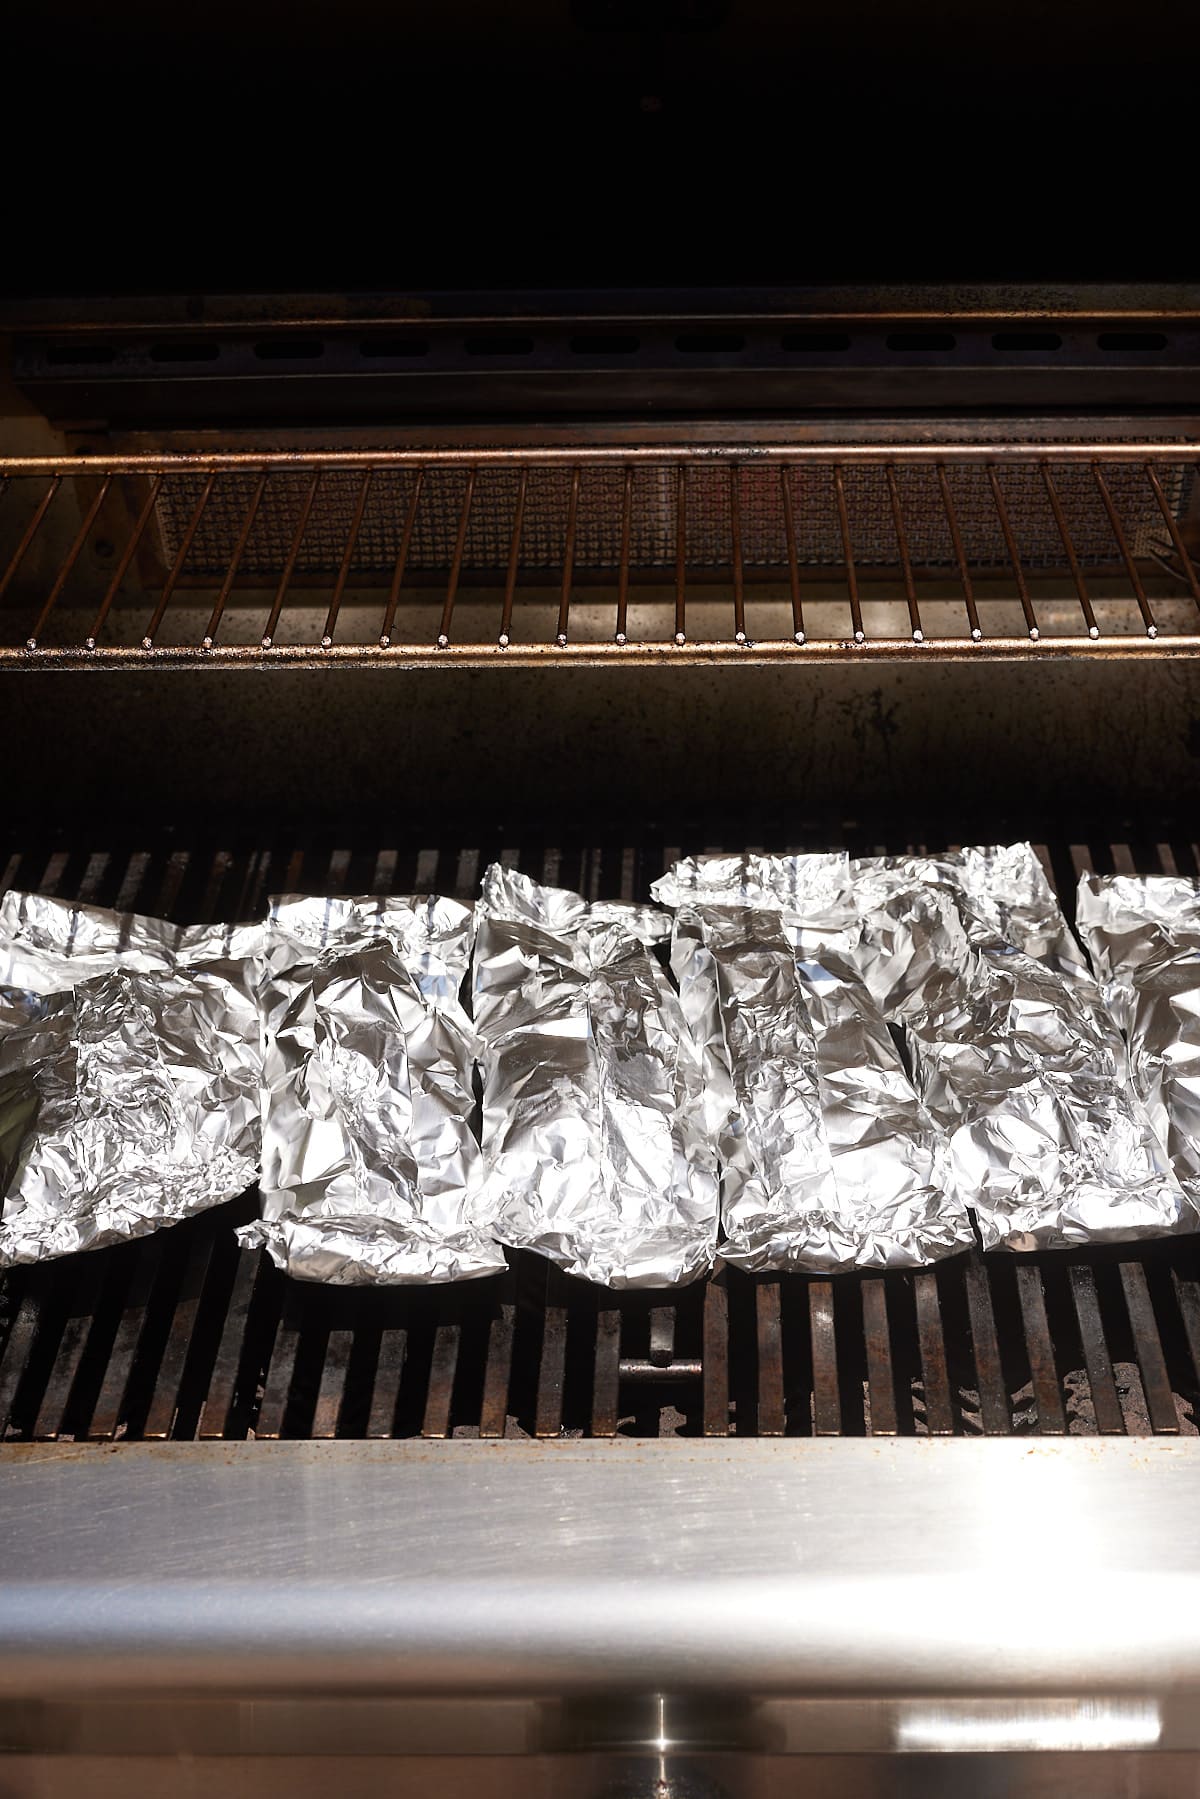 foil packets on a grill